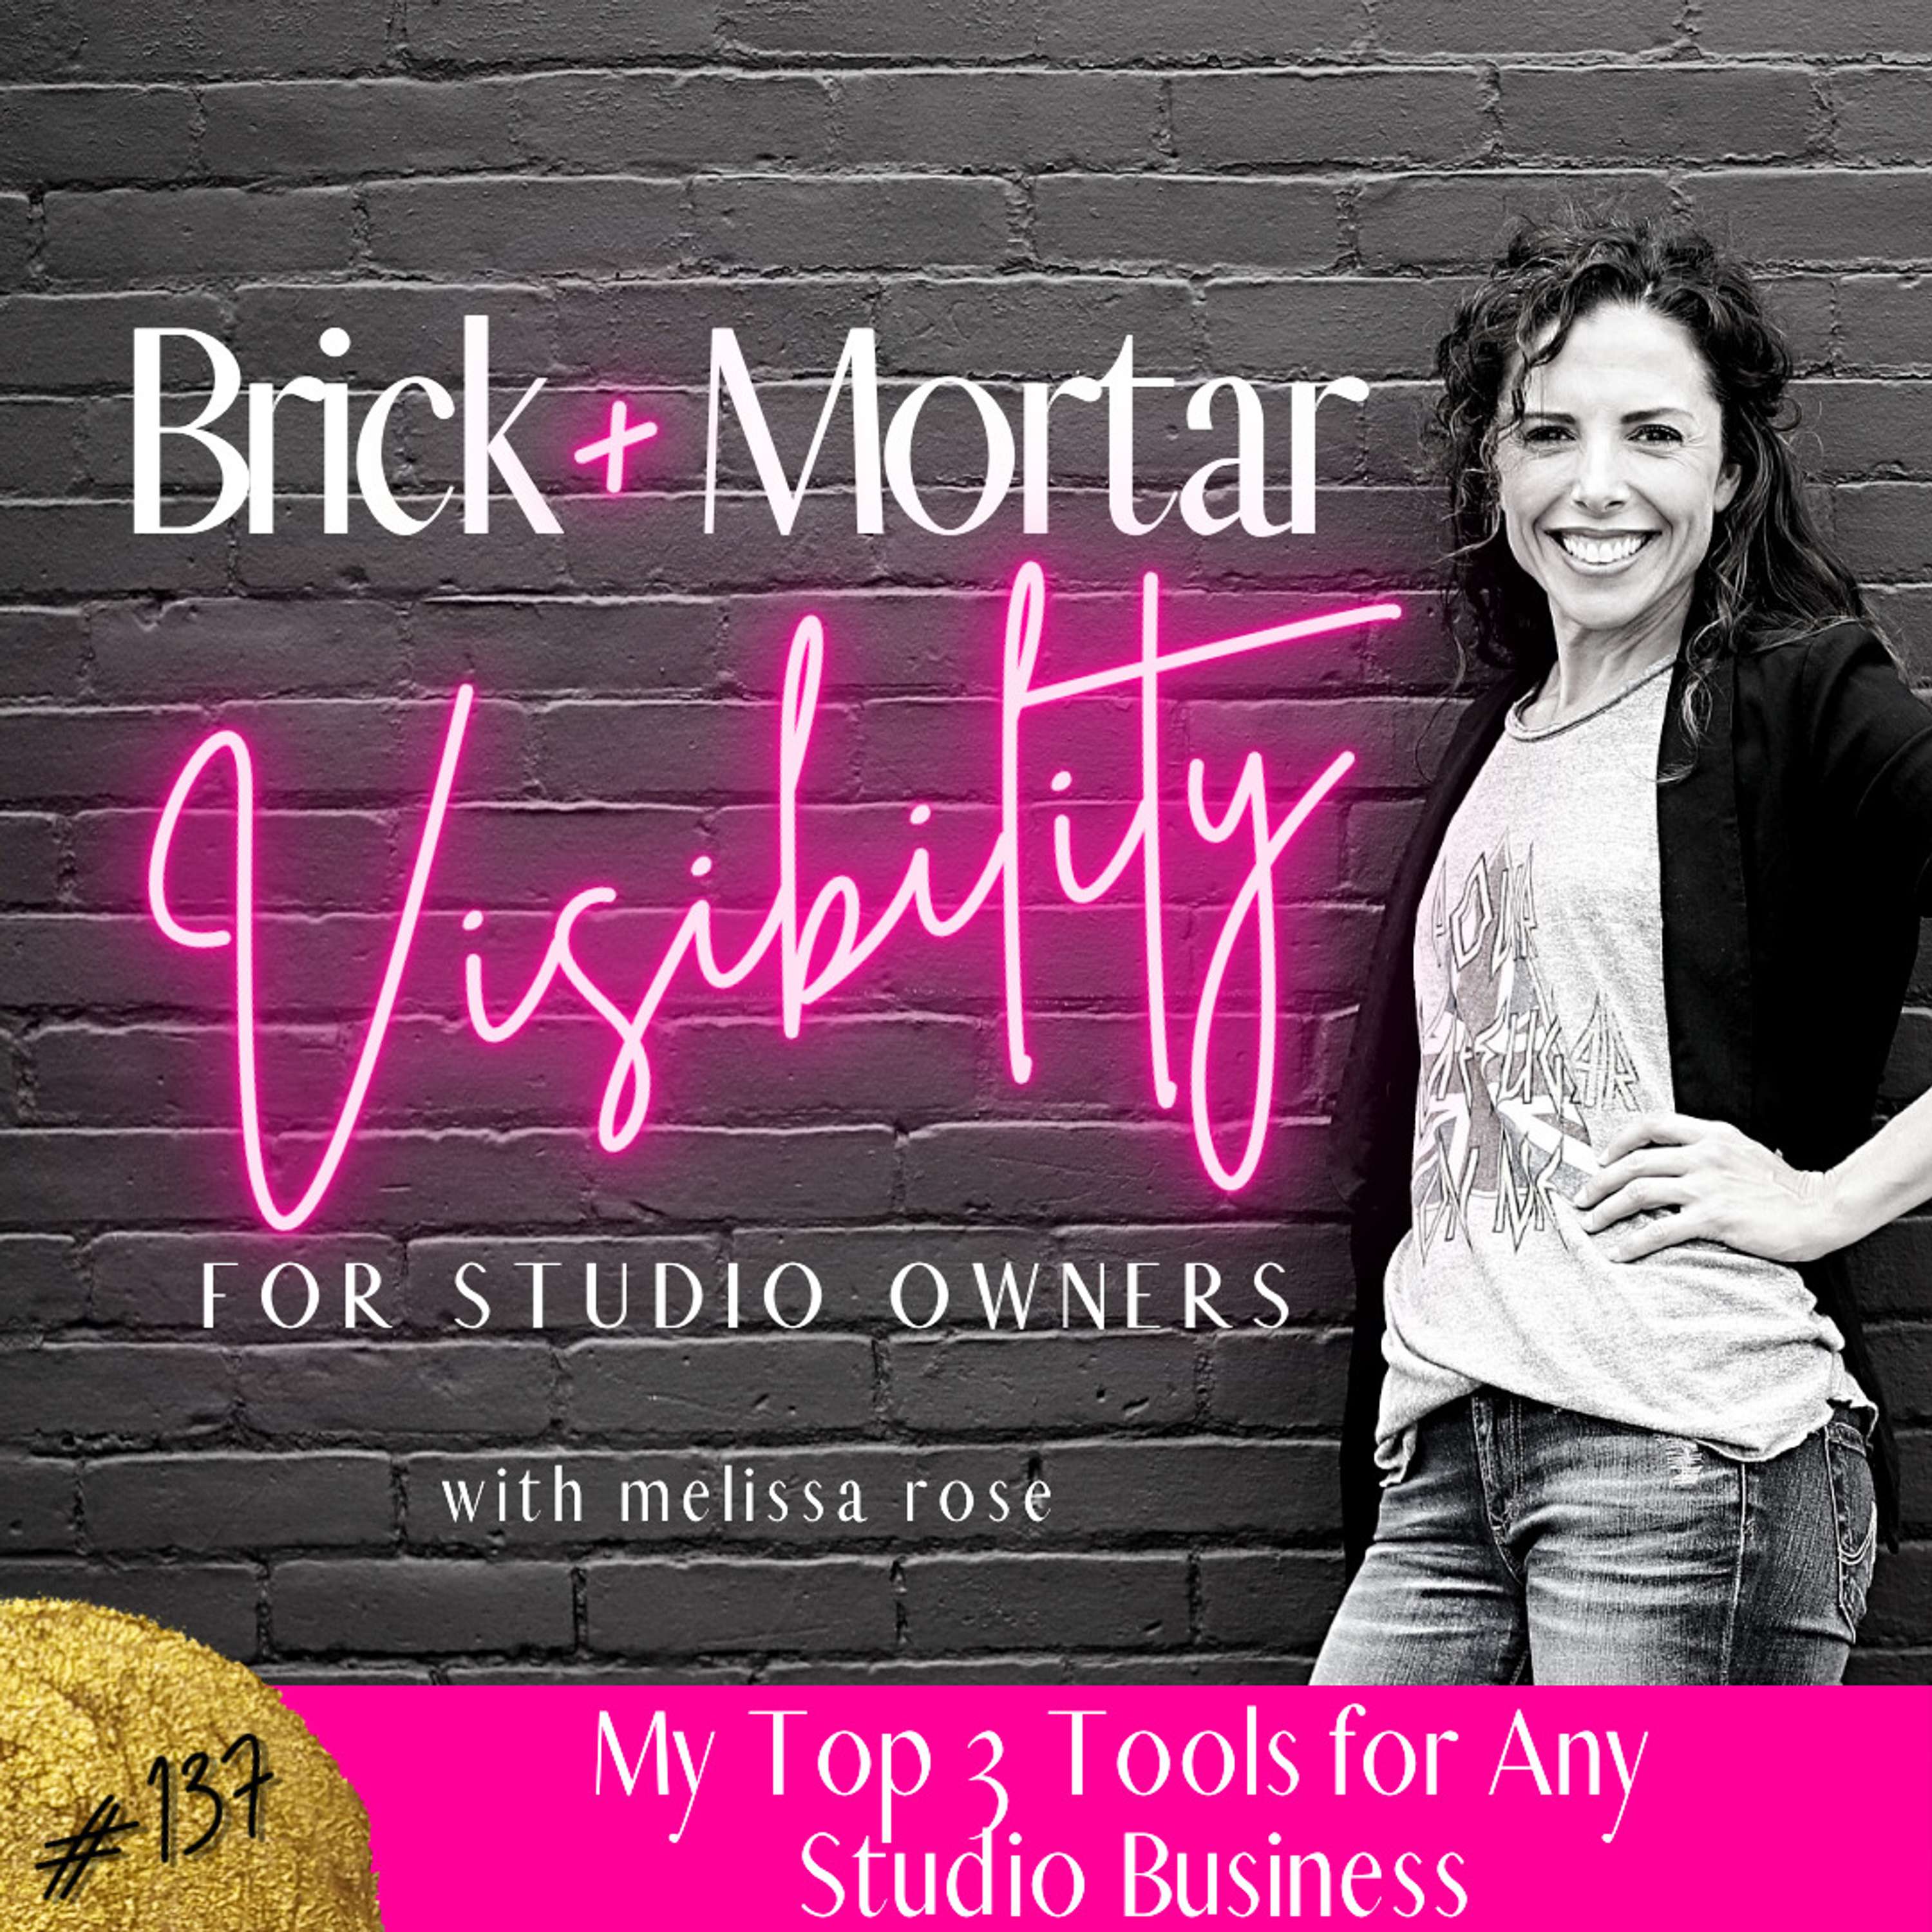 My Top 3 Tools for Any Studio Business